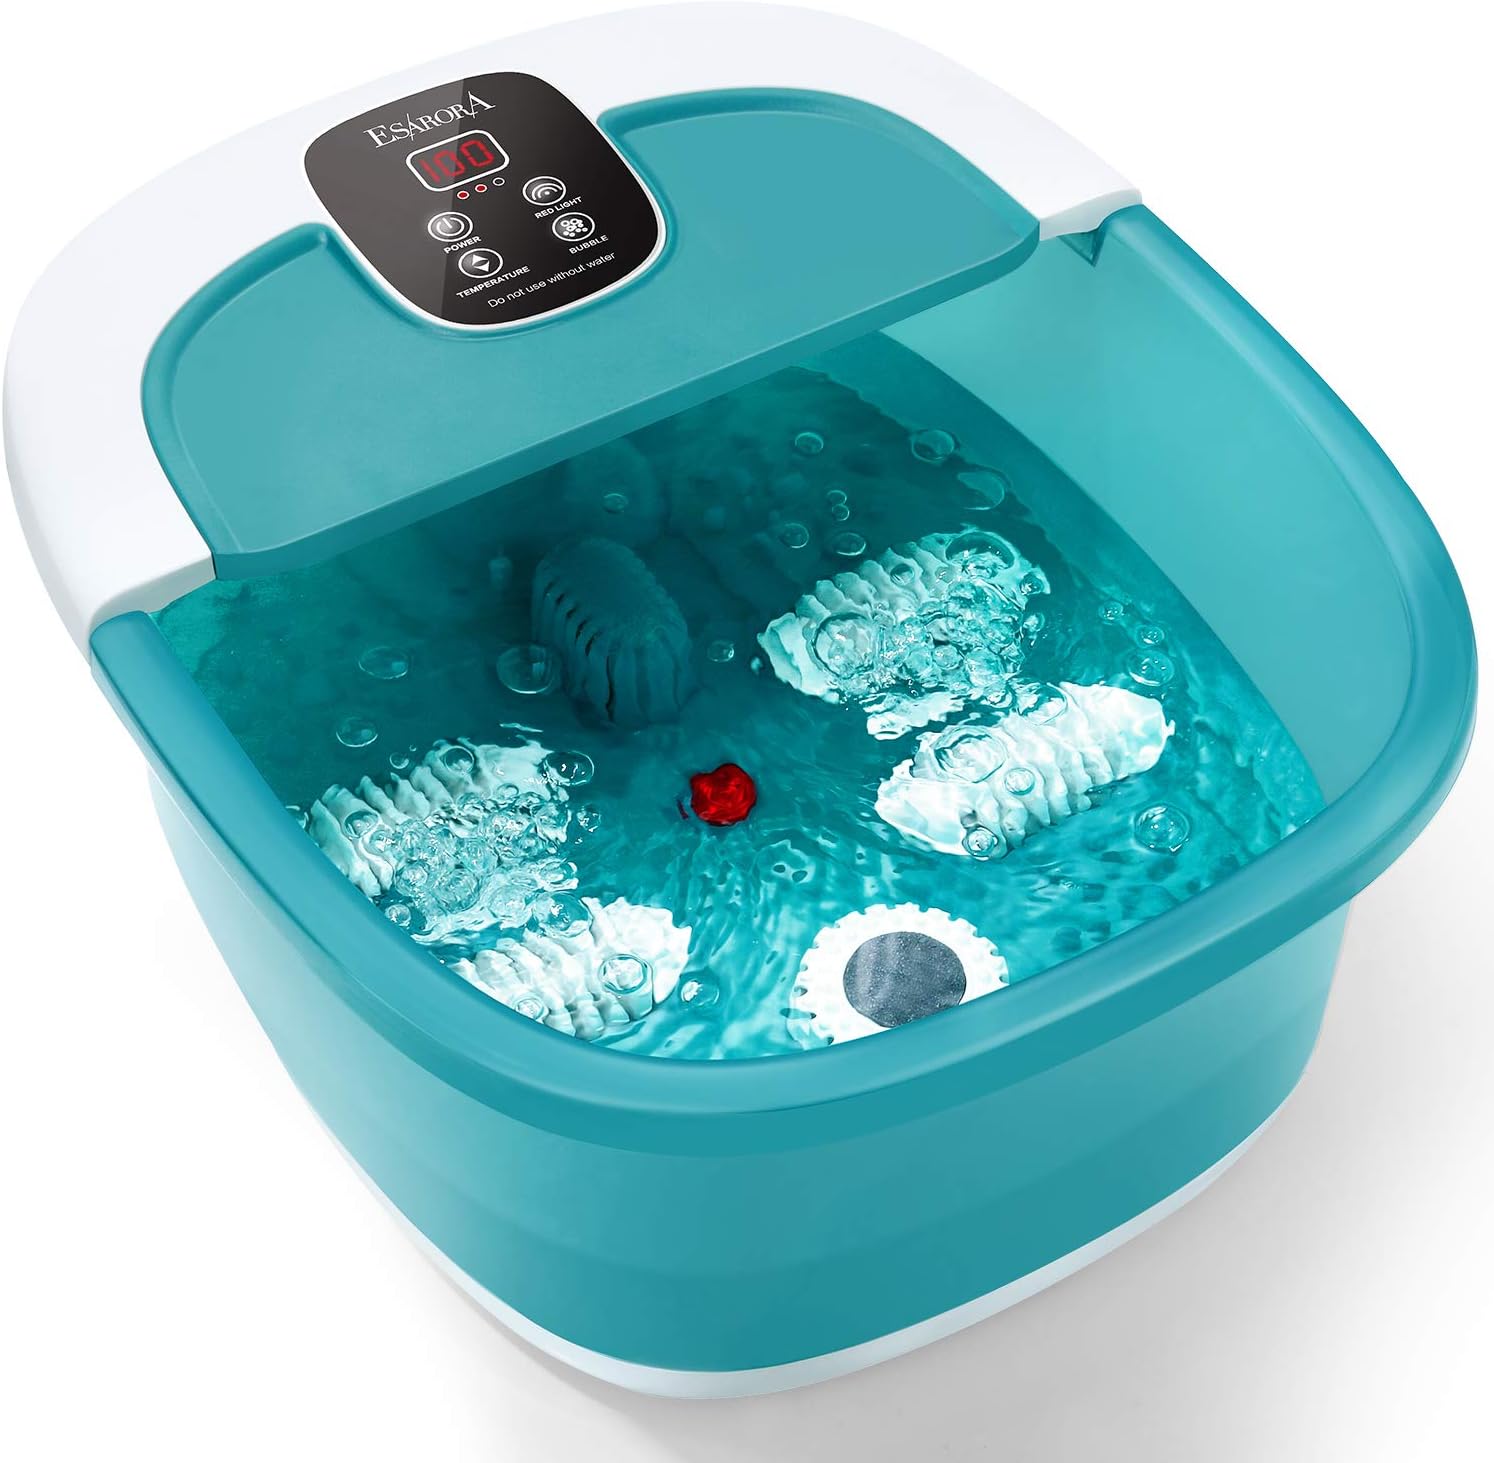 ESARORA Foot Spa Massager with Heat, Bubbles, Rollers - Soothes and Relaxes Tired Feet